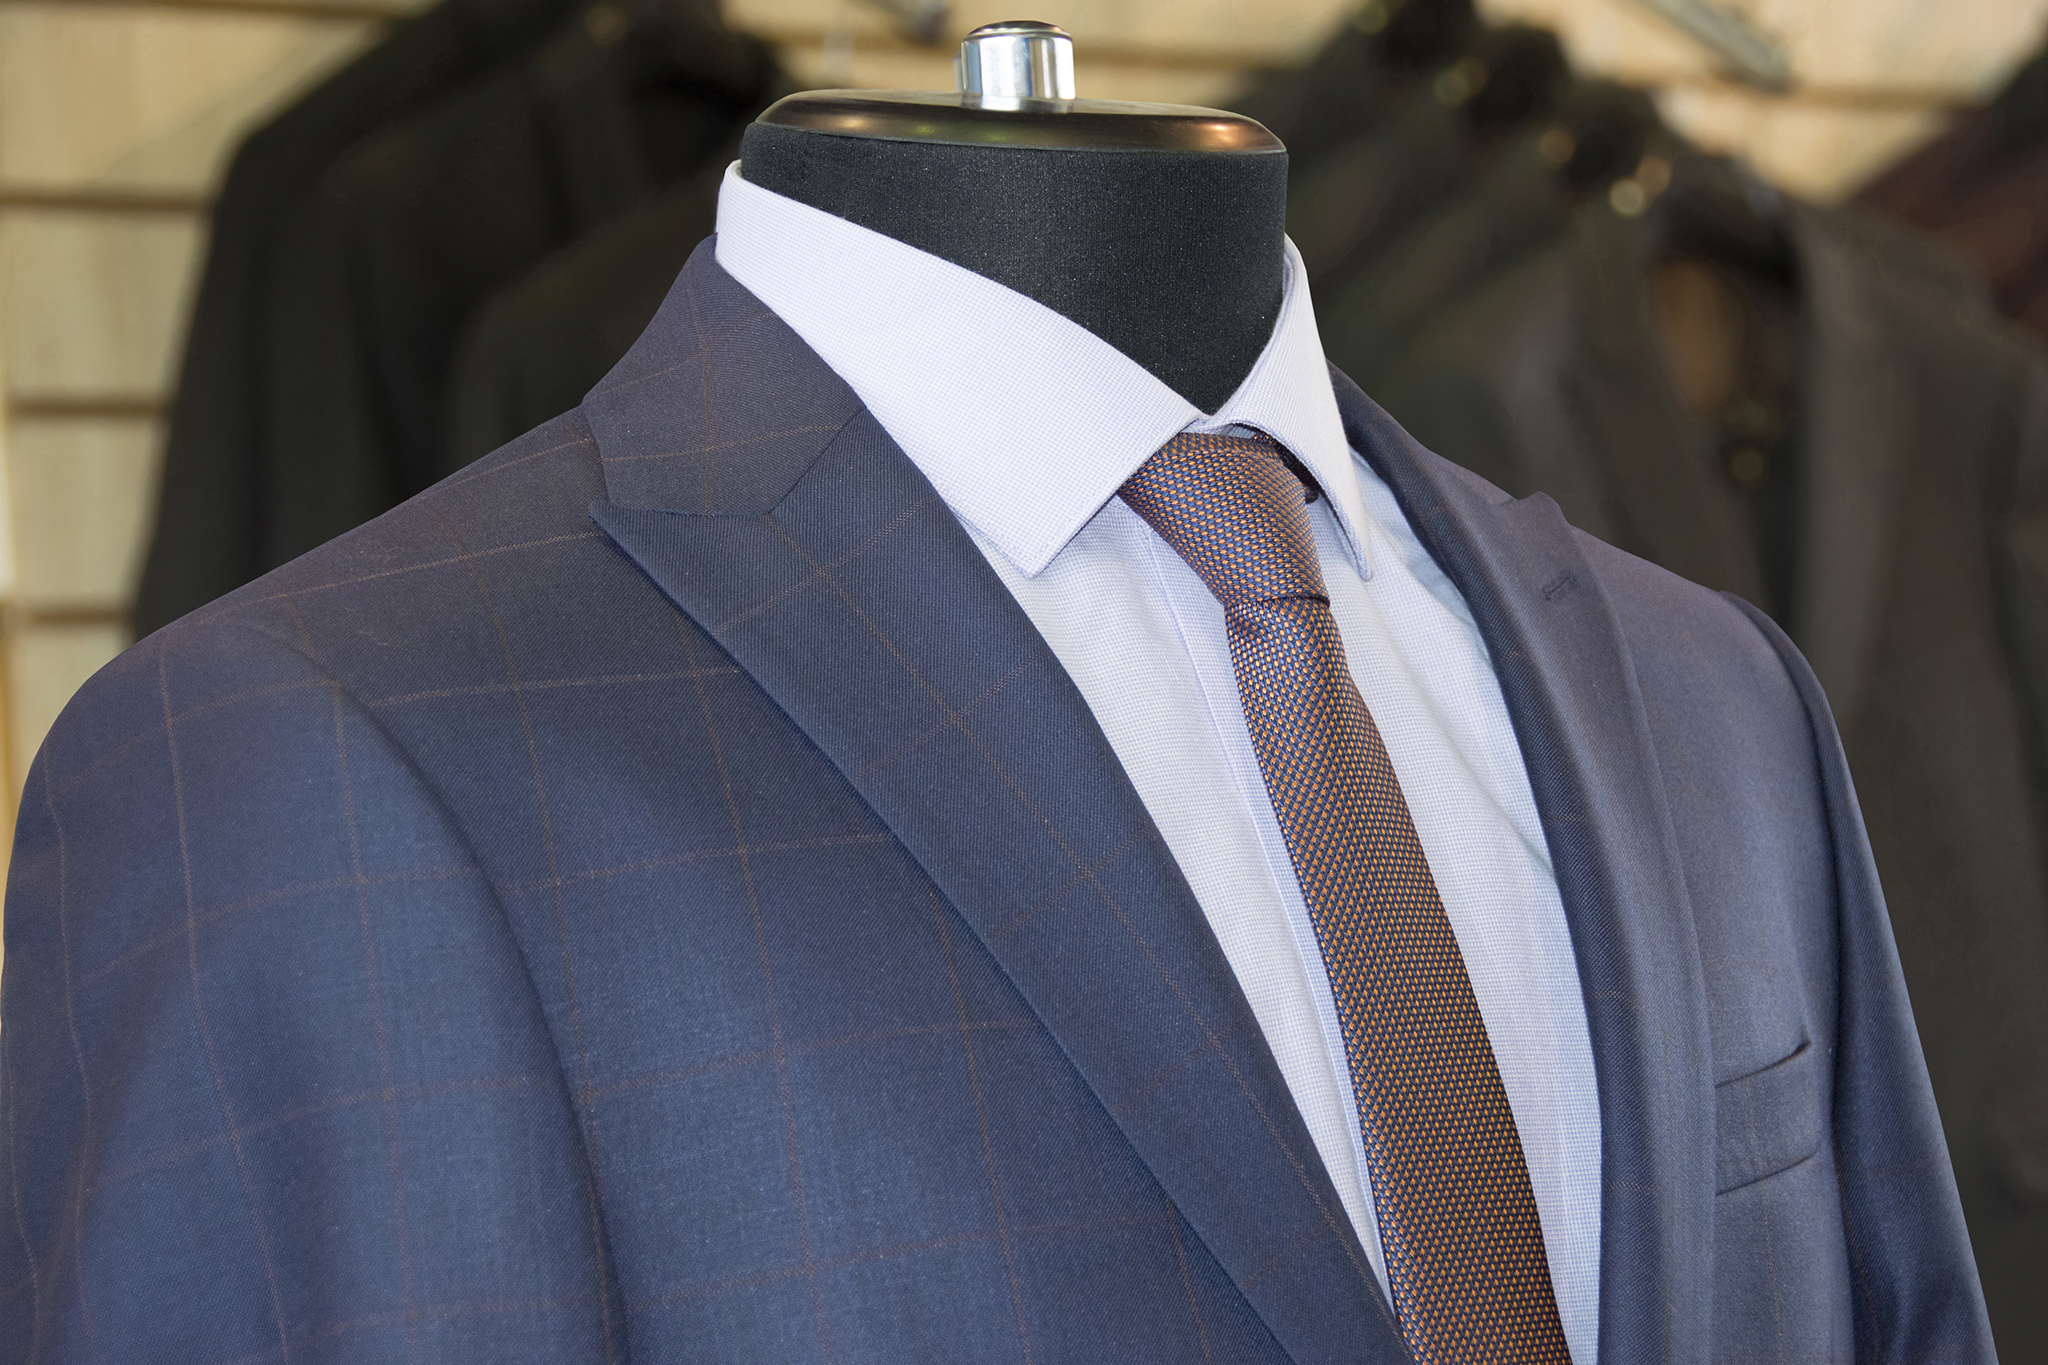 custom suits in NYC from top tailors ...